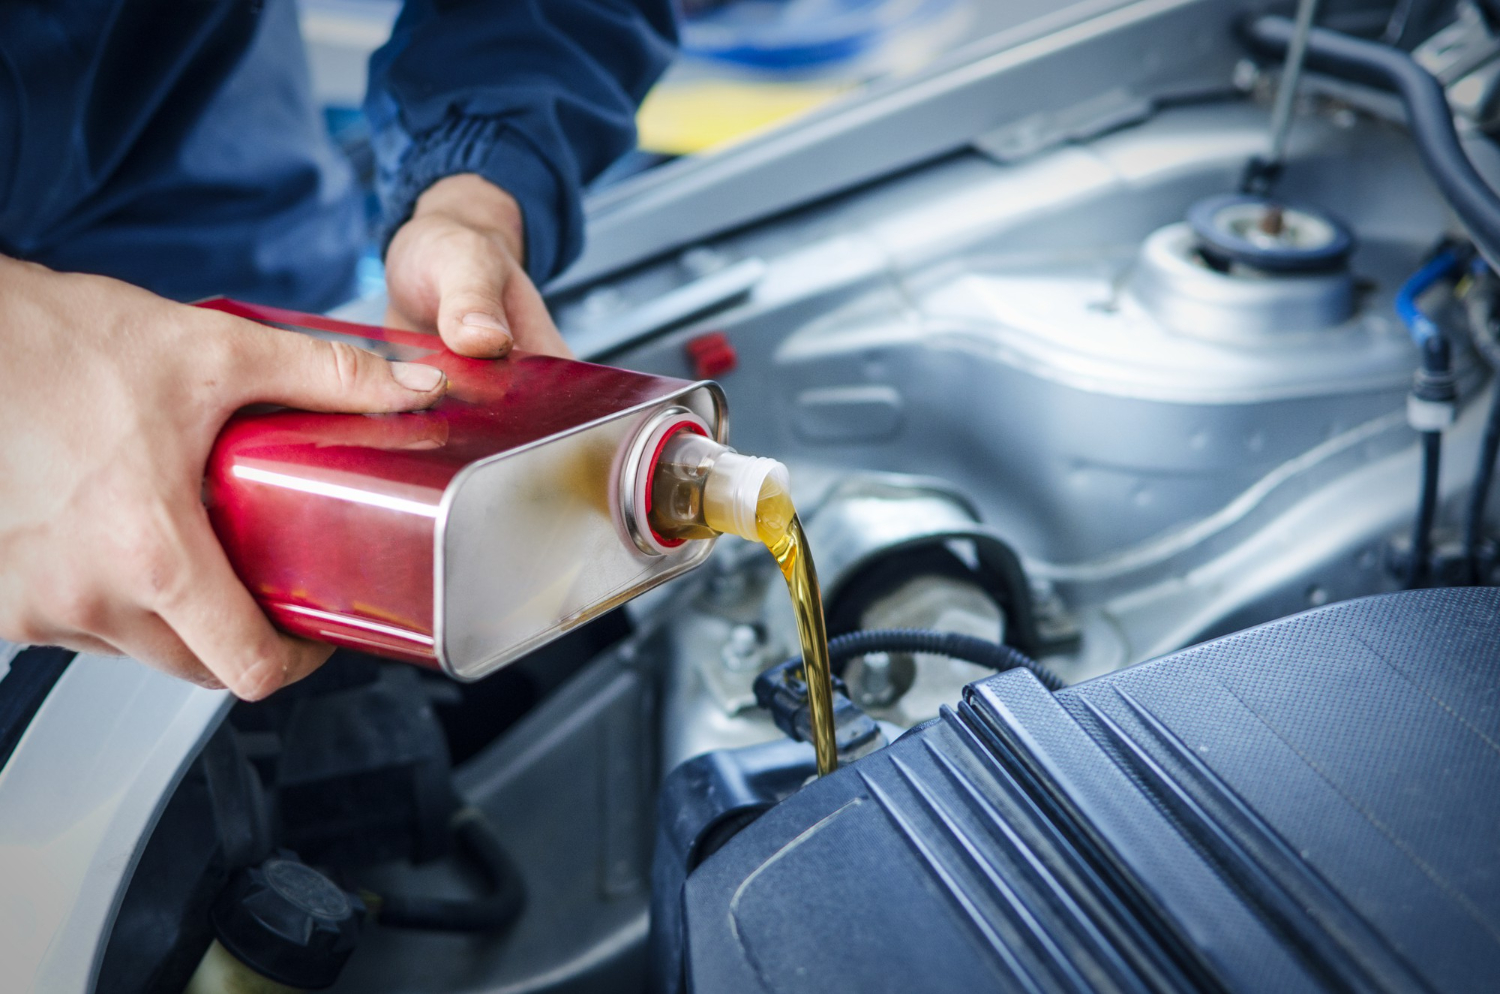 How often should I change the oil in my car?